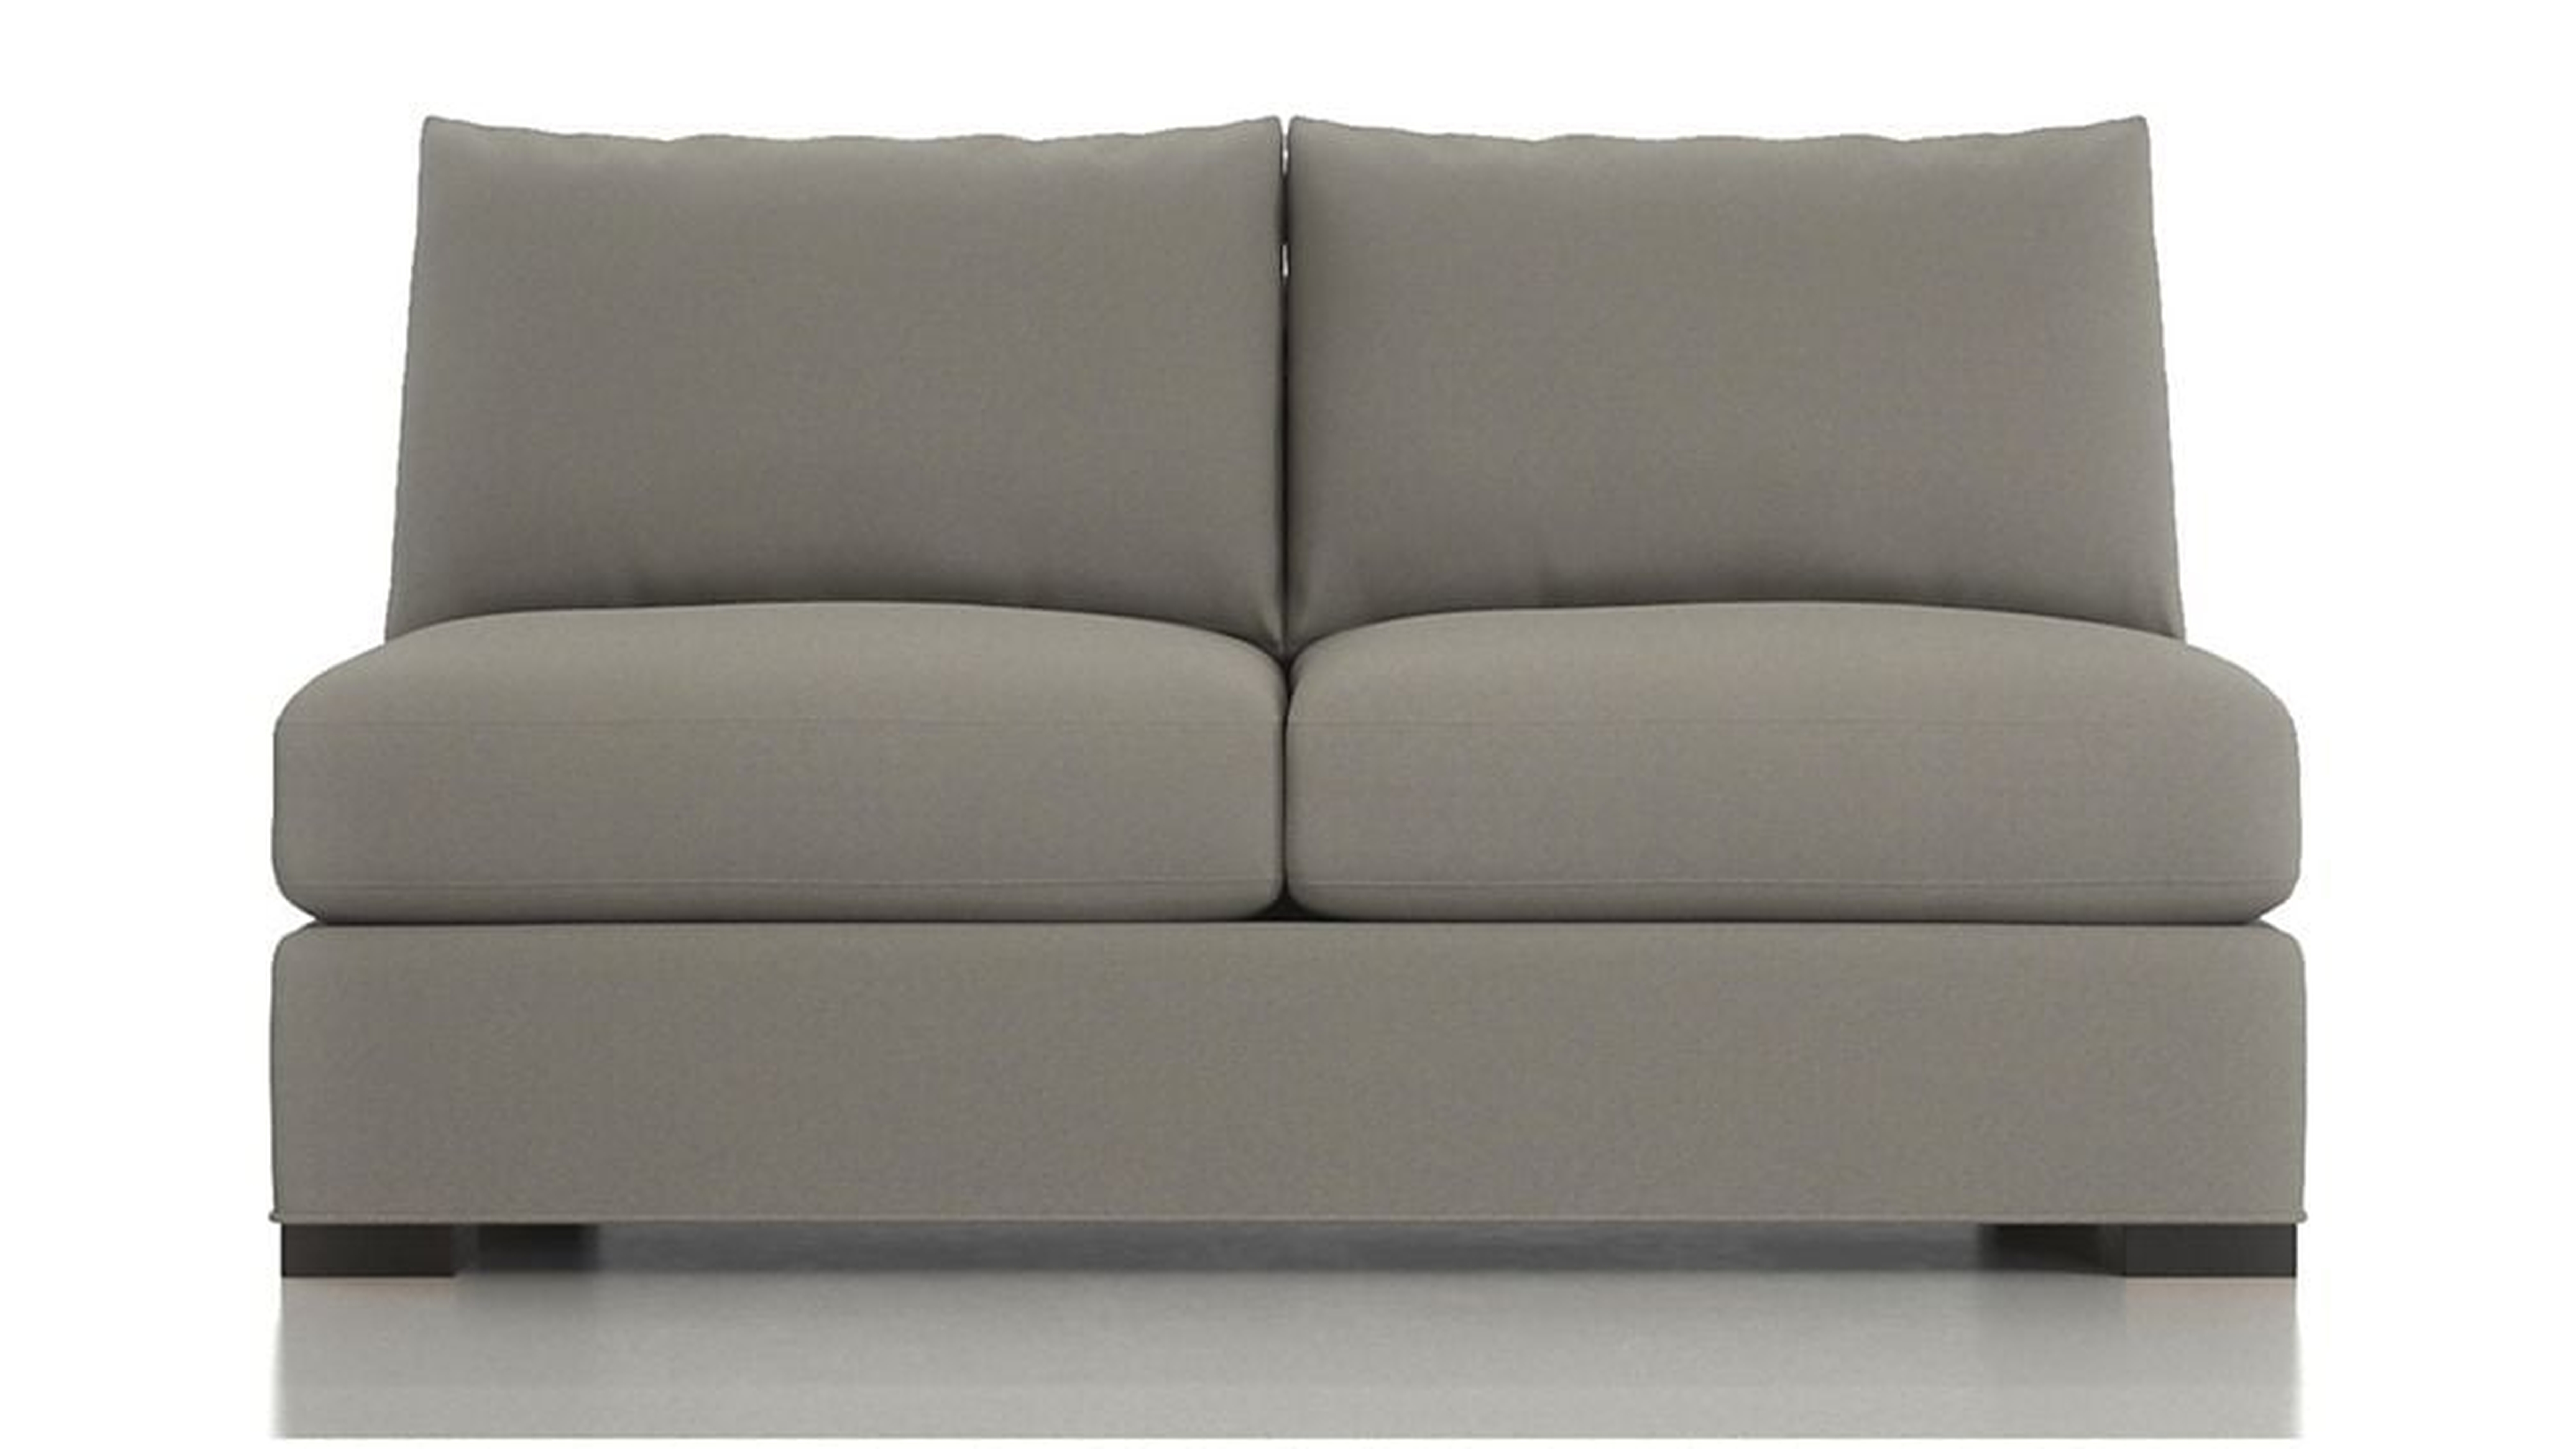 Axis Armless Loveseat - Crate and Barrel